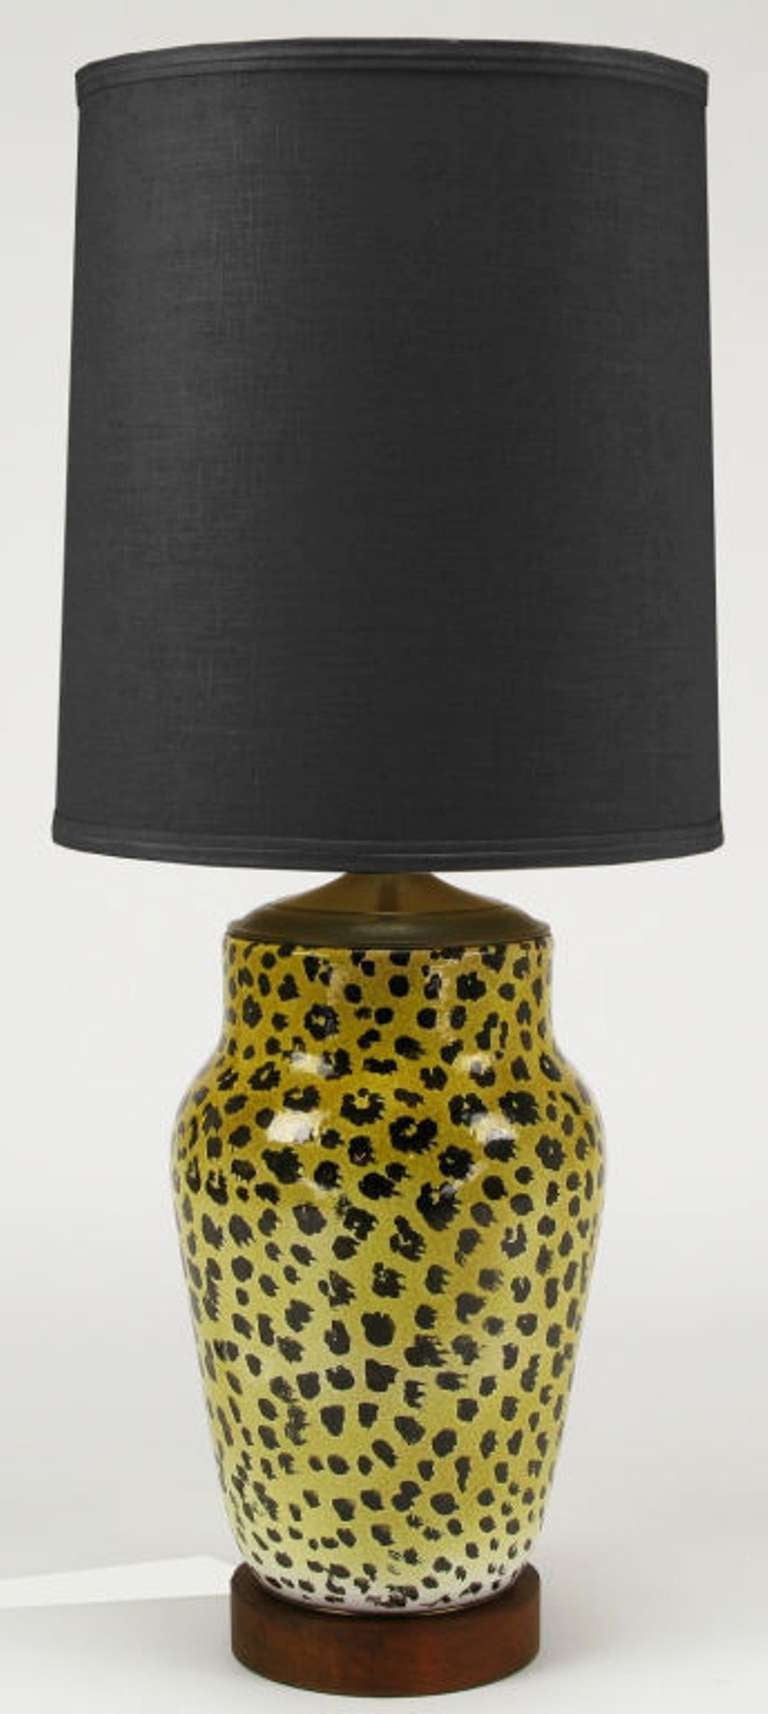 Large ginger jar shaped ceramic table lamp in leopard pattern hand glazing. Walnut wood base and patinated brass cap with original milk glass diffuser and triple socket illumination. Sold sans shade.